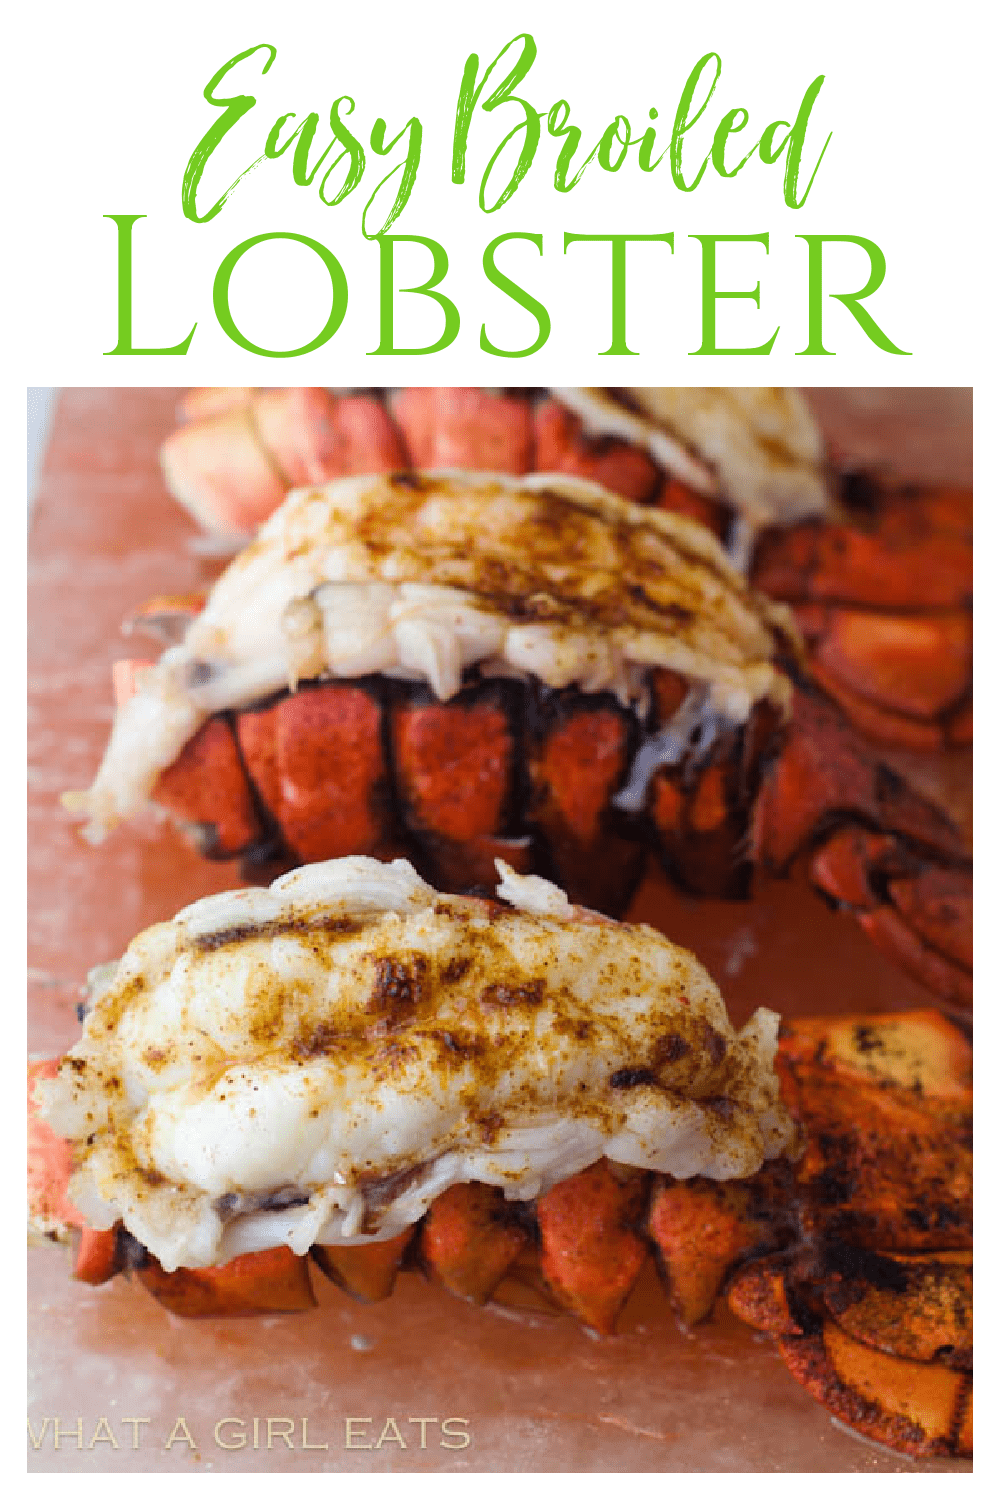 Broiled lobster tail is a decadent, impressive, yet easy-to-make dinner. While it’s not a budget meal, it can be made at home for a fraction of the cost of eating out. For your next special occasion, here’s the best recipe for broiled lobster tails.